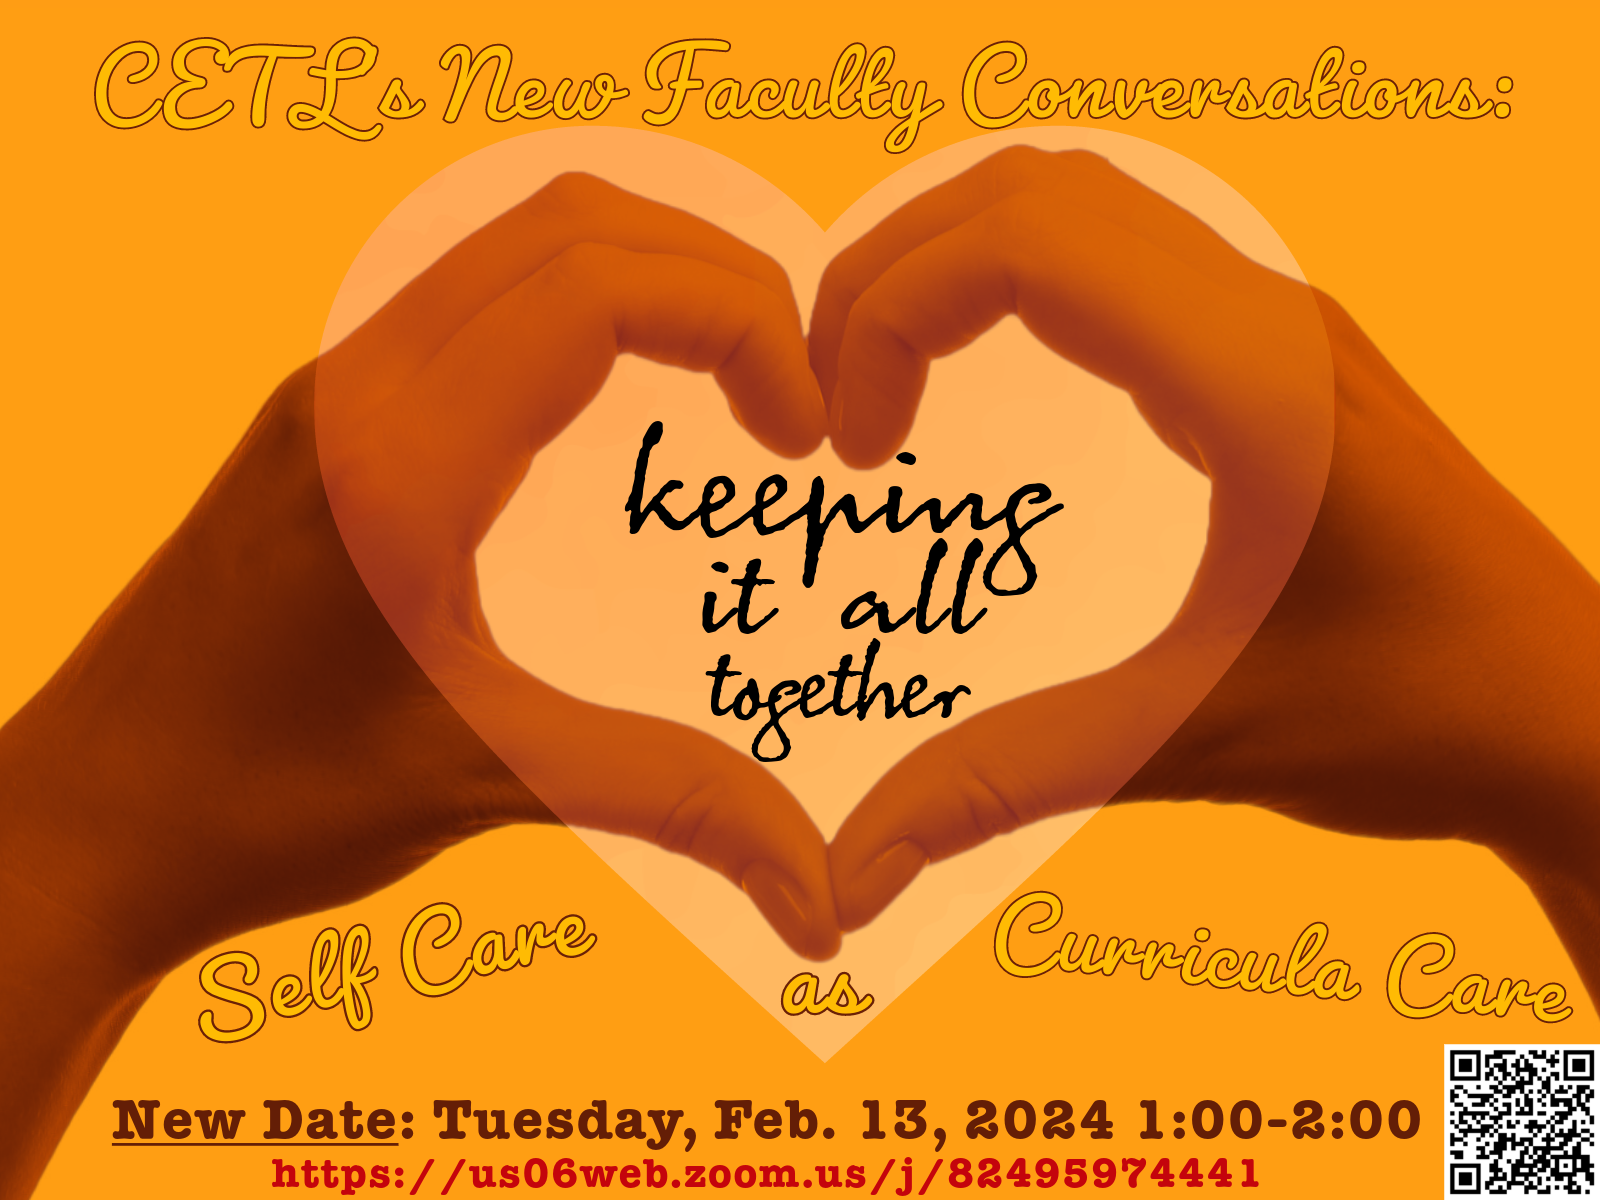 Flyer for the CETL New Faculty Conversations virtual workshop "Keeping It All Together: Self Care as Curricula Care" - image includes hands held in the shape of a heart on a gold background with text noting the title and date/time for the event.